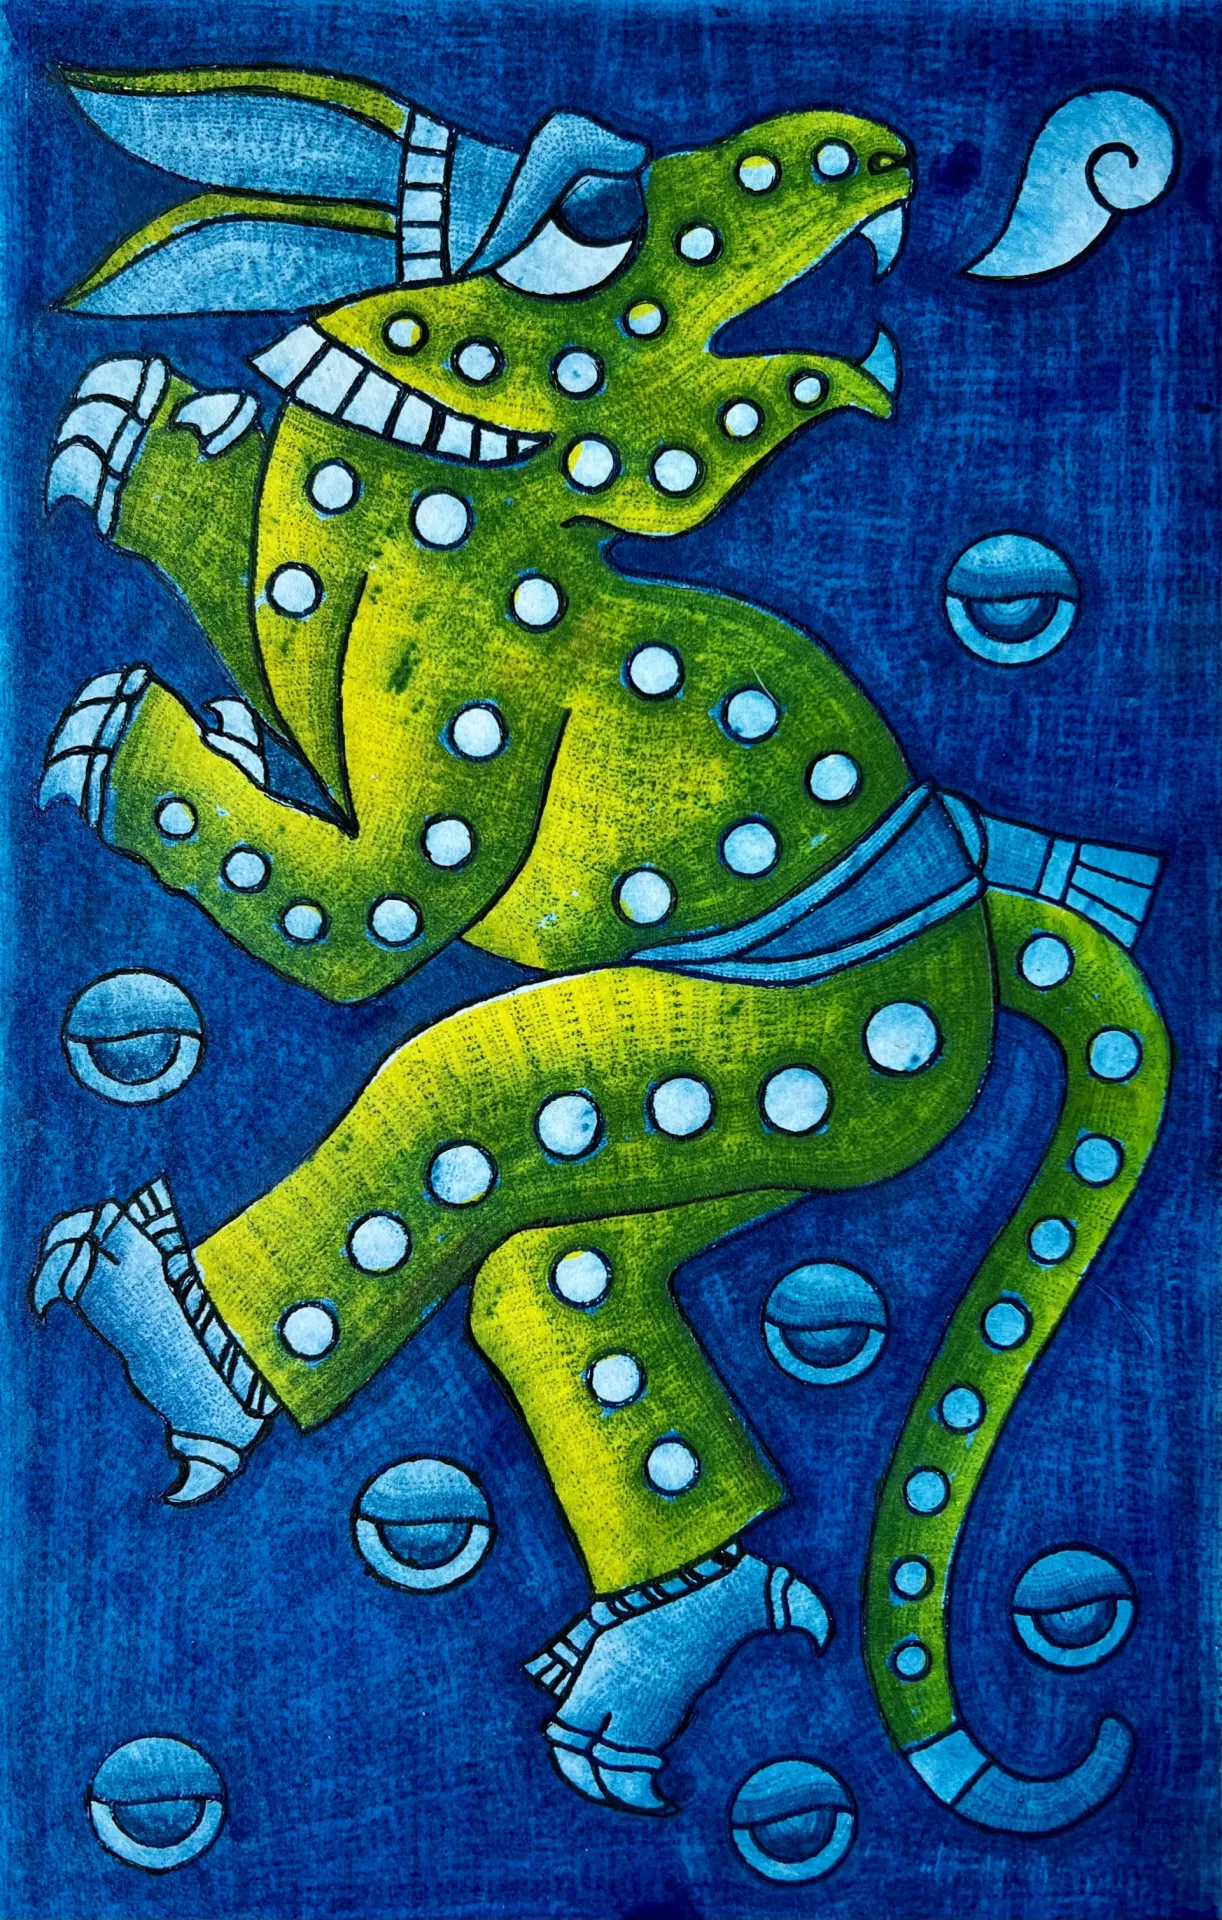 Maestro Reyes Gomez Jaguar con Estrellas (Jaguar with Stars), 2012  Ink and Mixed on cotton paper.  This is the first piece of a larger collection called Dancers. An elongated green and yellow tailed figure with clawed paws dances in profile.It wears a feathered crown as a stylized breath puffs from its fanged mouth. Light blue orbs float in the dark blue background.